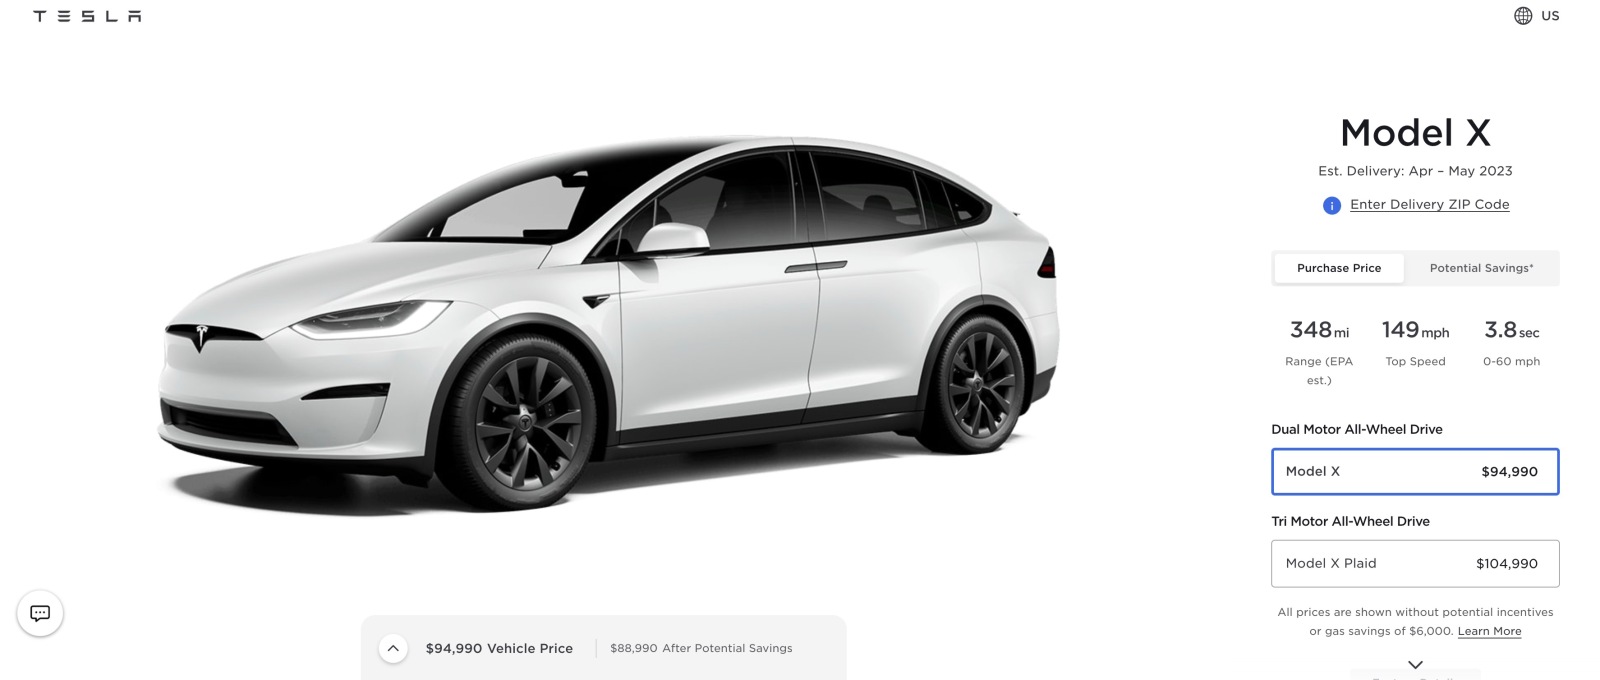 Tesla Model X prices April 2023 - Tesla Surprises the Market with Series of Price Reductions on Entire Car Lineup to Keep Up with Competition